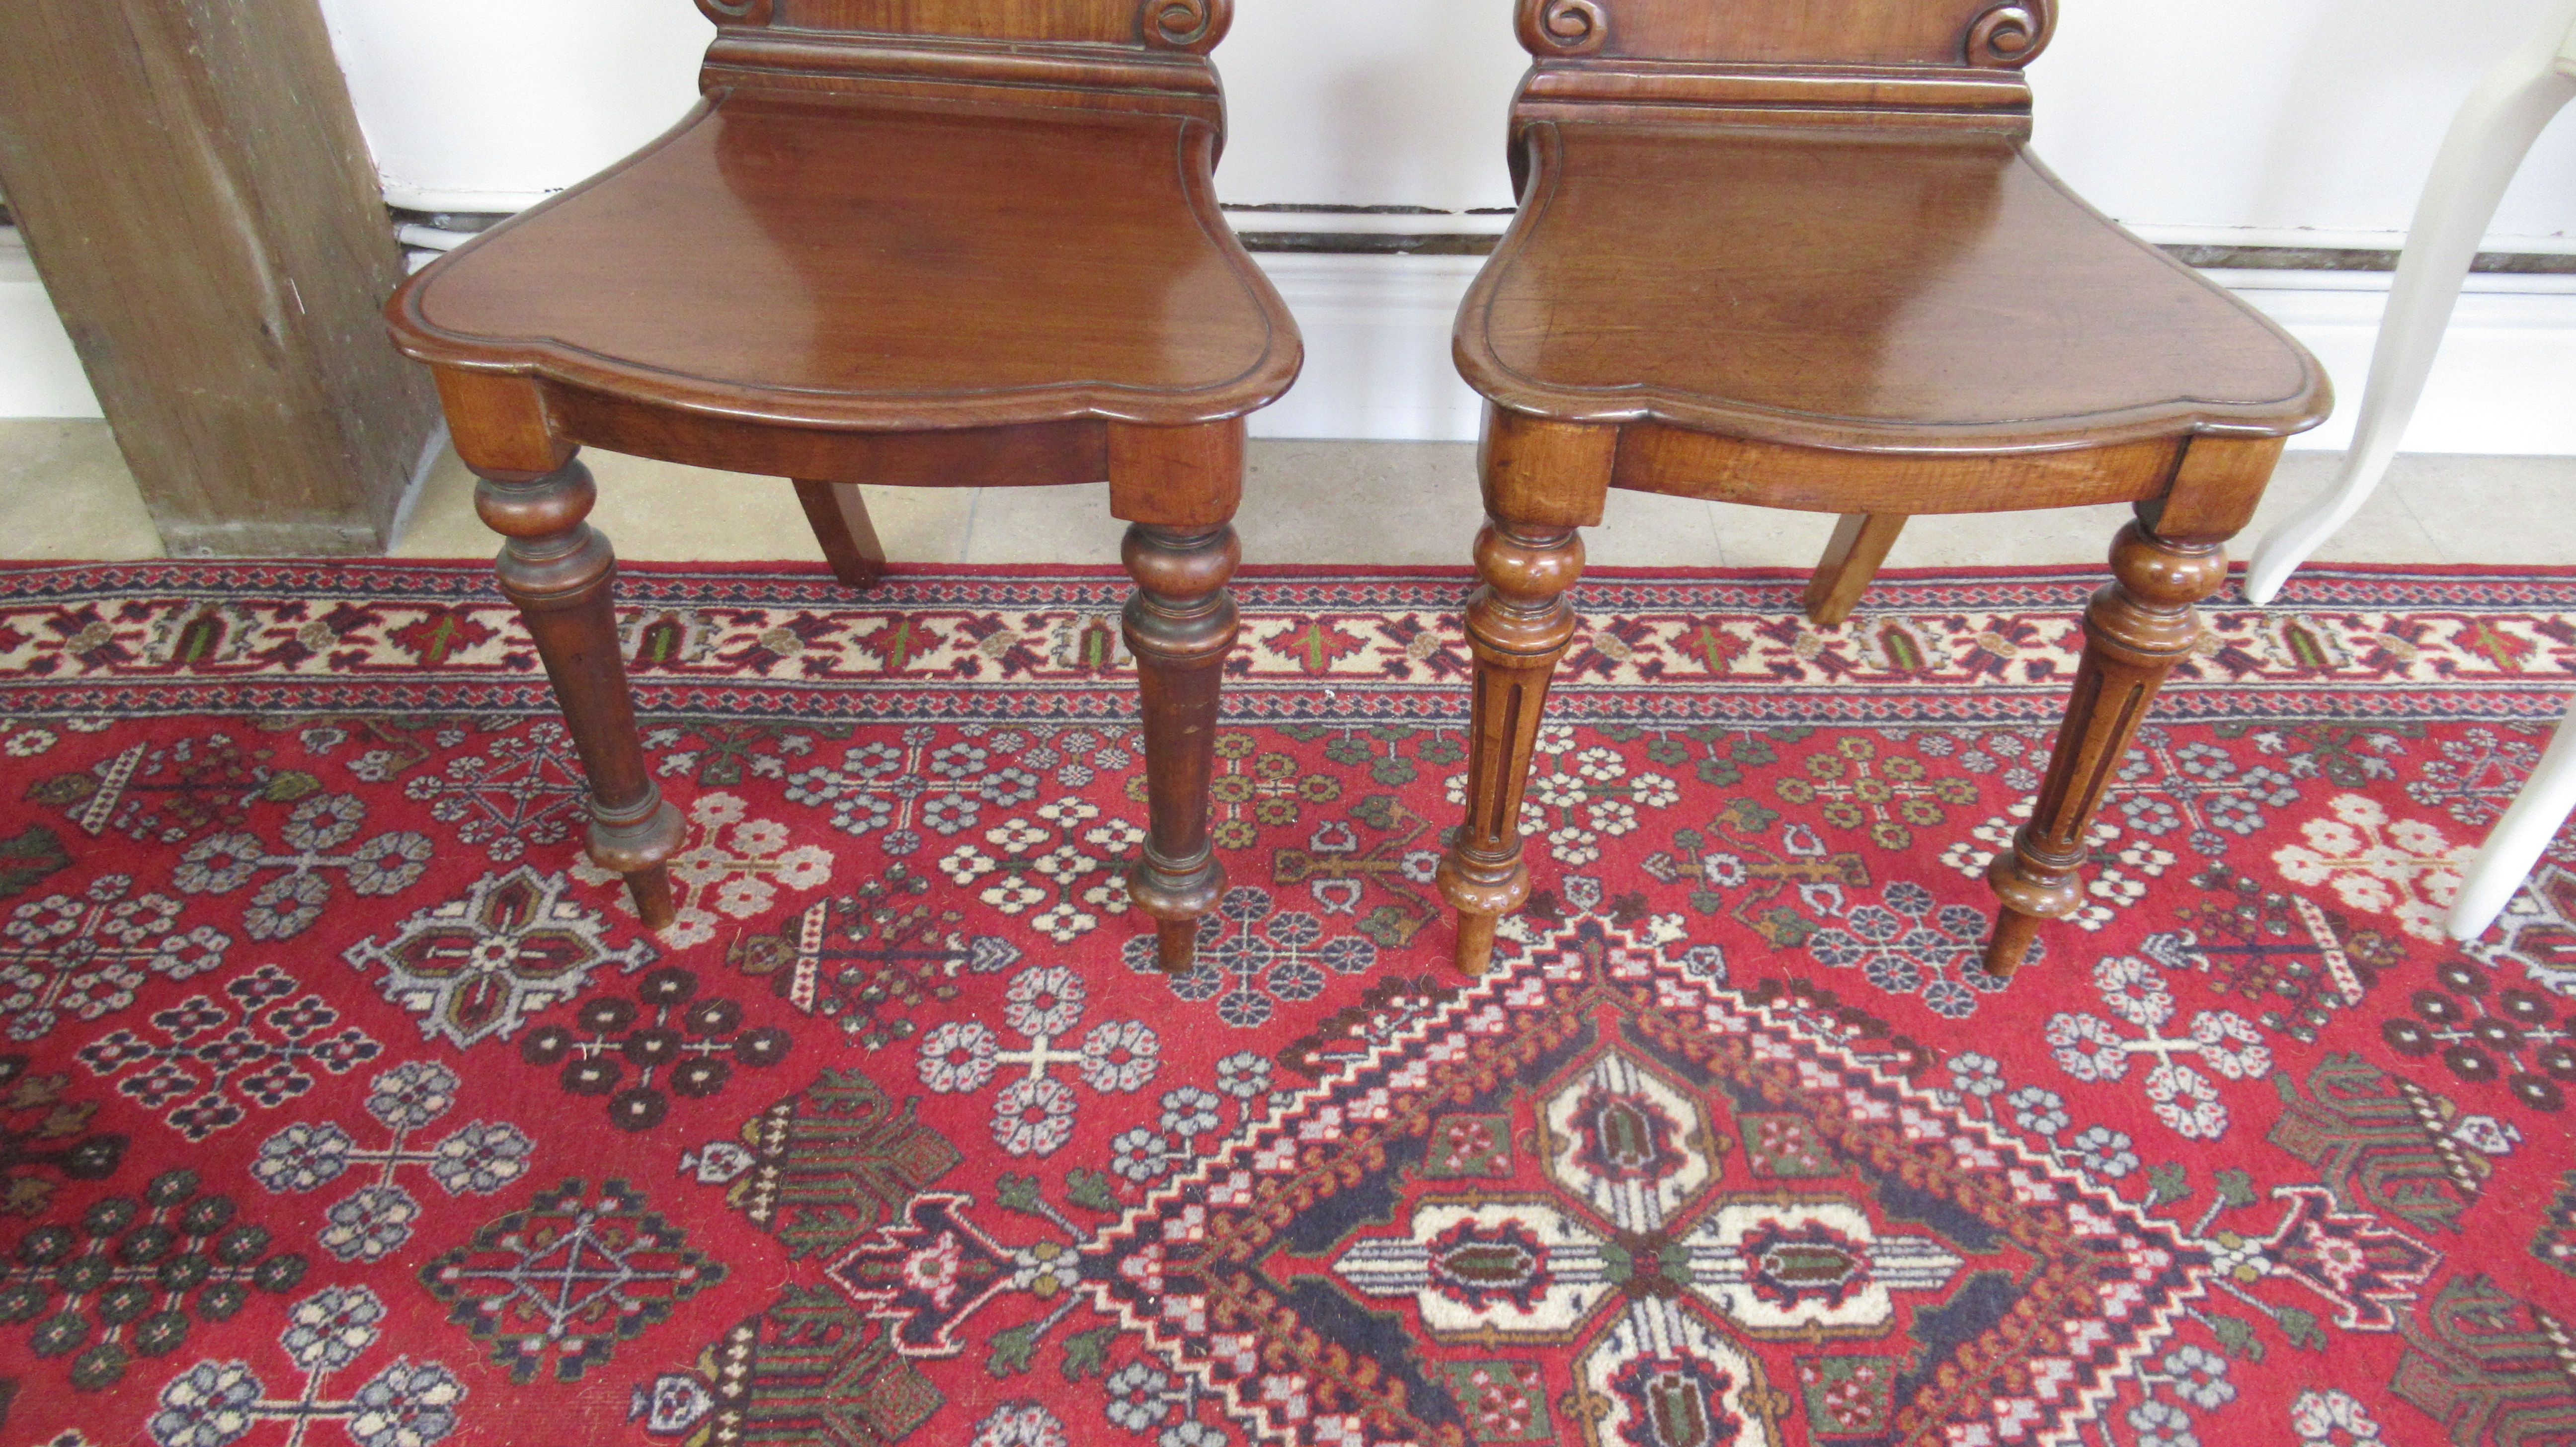 Two 19th century hall chairs, one with turned legs and one with reeded legs - Image 2 of 2